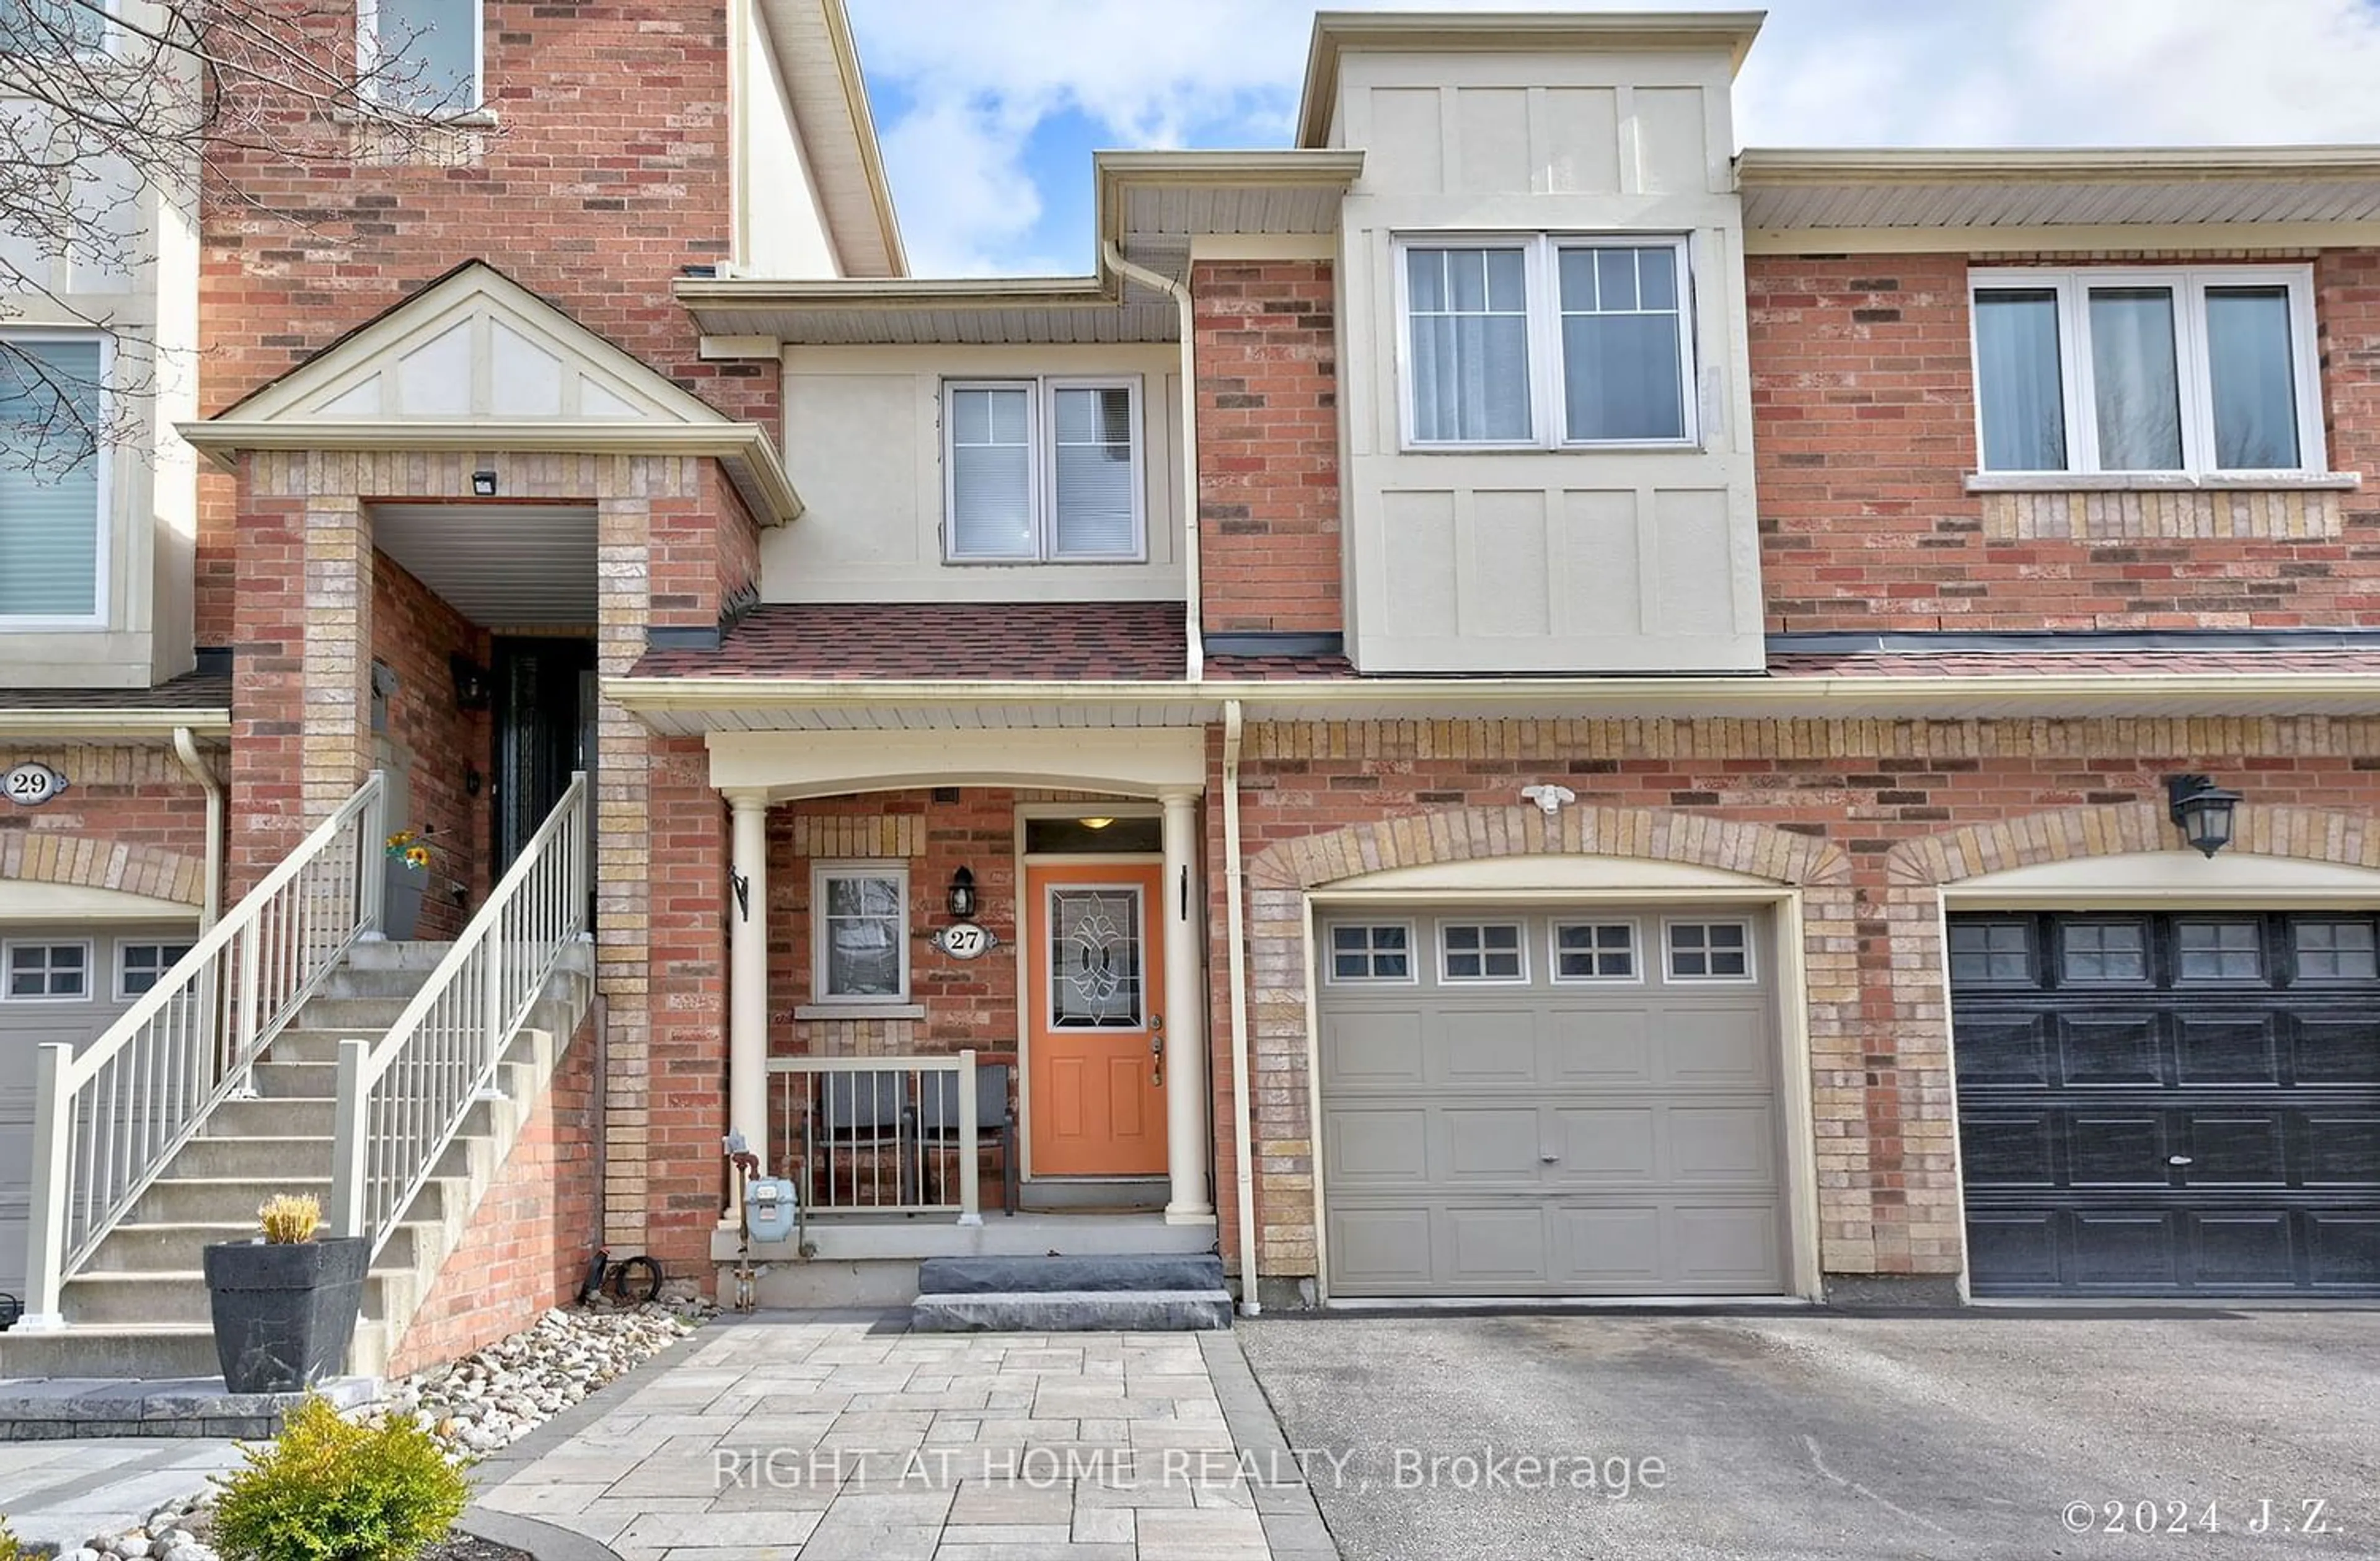 Home with brick exterior material for 27 Croker Dr, Ajax Ontario L1S 7T4